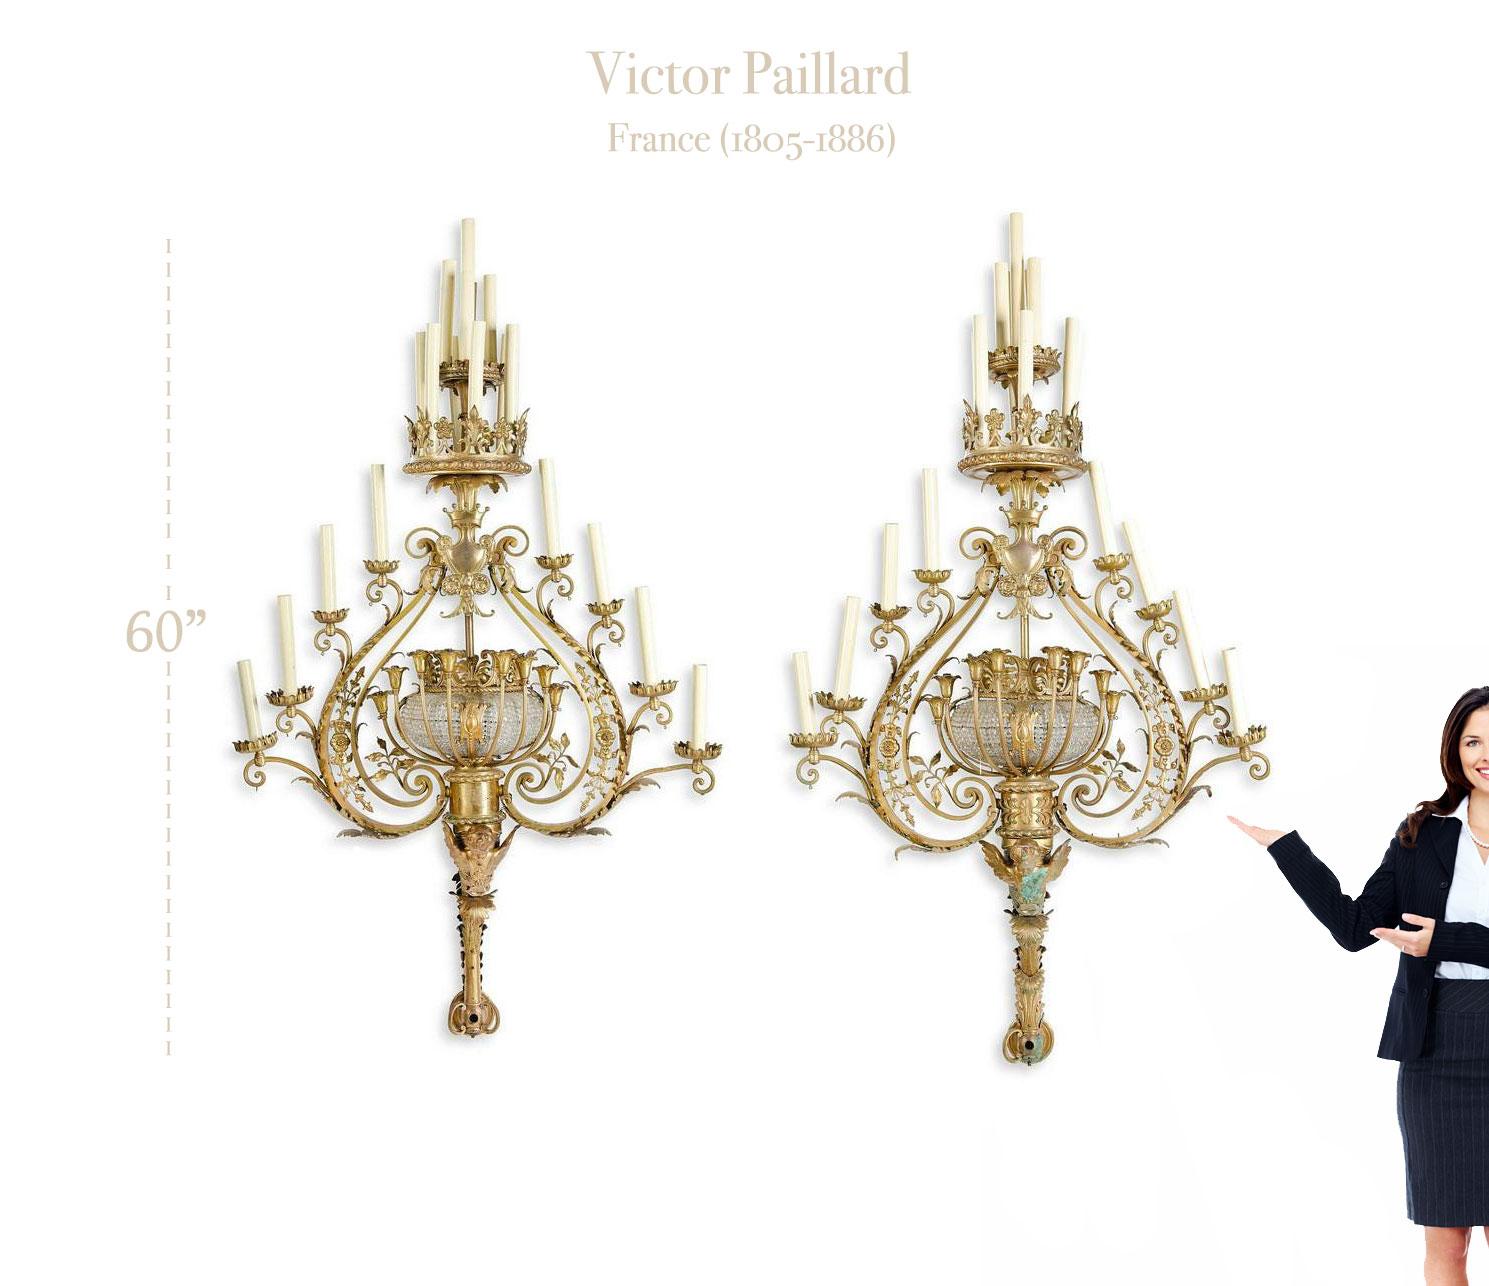 A monumental pair of Belle Epoque gilt bronze and cut glass twenty six light wall sconces By Victor Paillard (1805-1886)
Inside of one acanthus scroll stamped 0137 / VP.
height 60in (152.5cm); width 43in (109cm); depth 24in (61cm) 
Provenance: